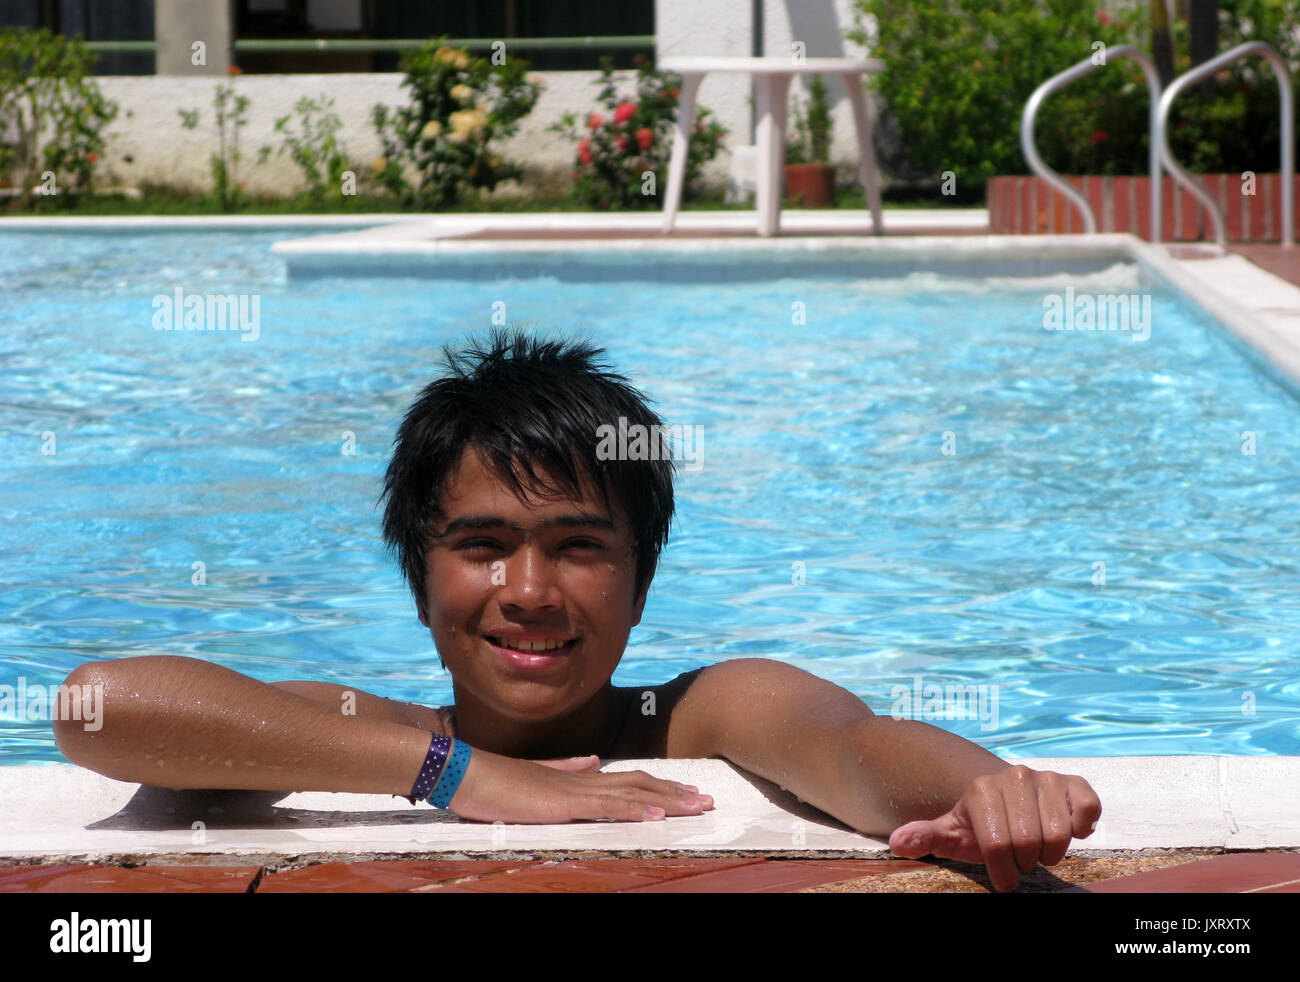 Smiling boy lying on side of swimming pool Stock Photo